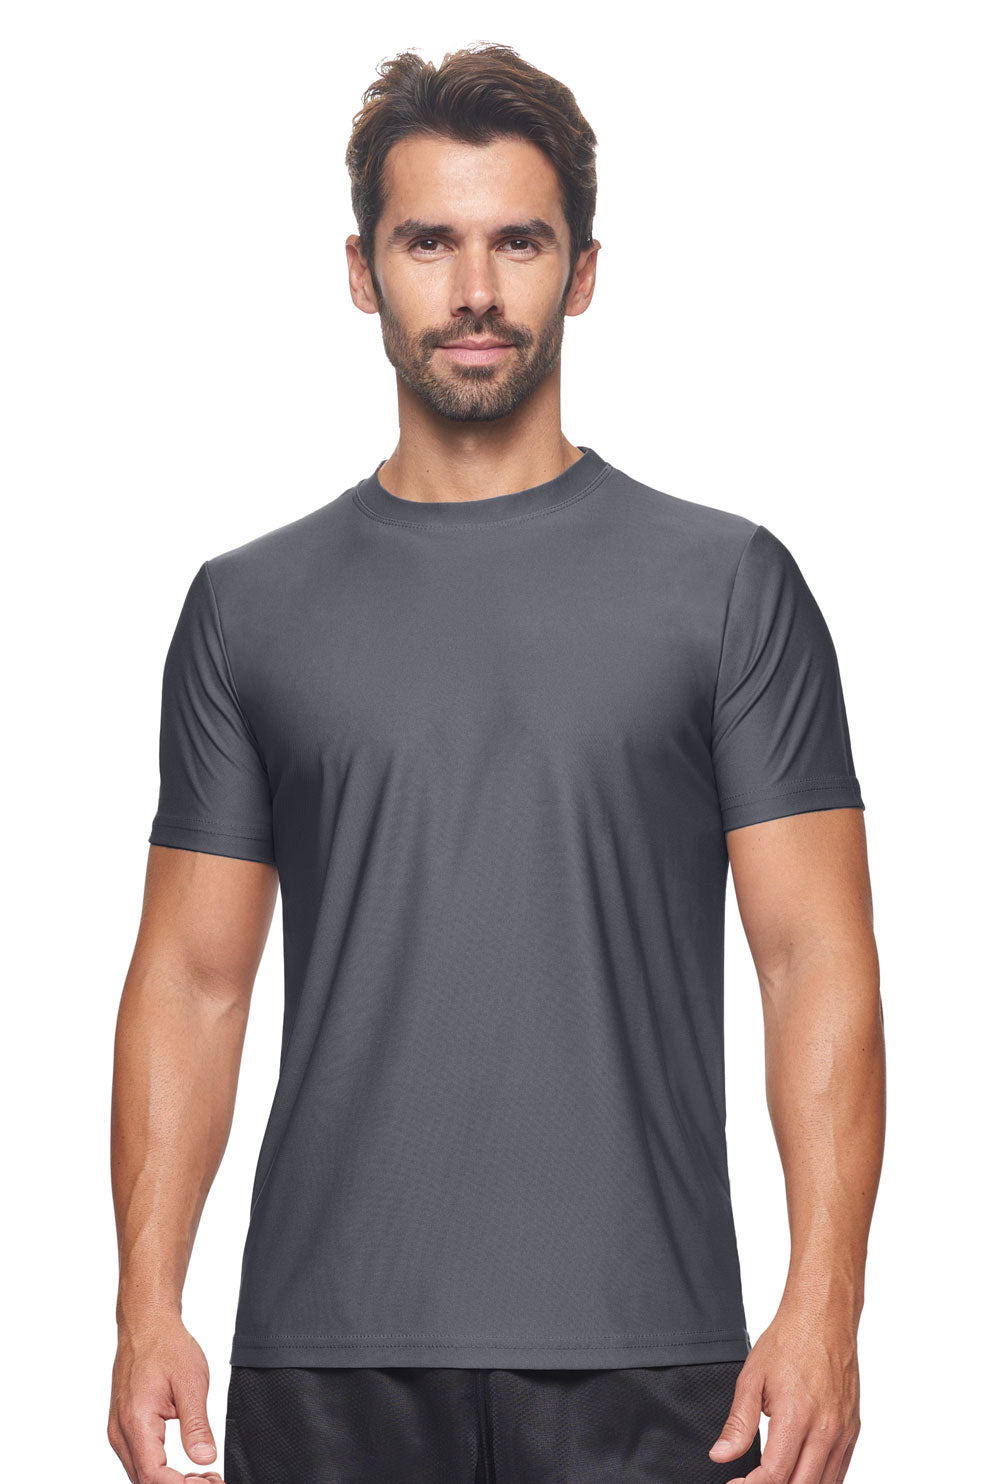 Expert Brand Wholesale Ecotek Recycled Performance Shirt Made in USA REPREVE RP801U Charcoal#charcoal